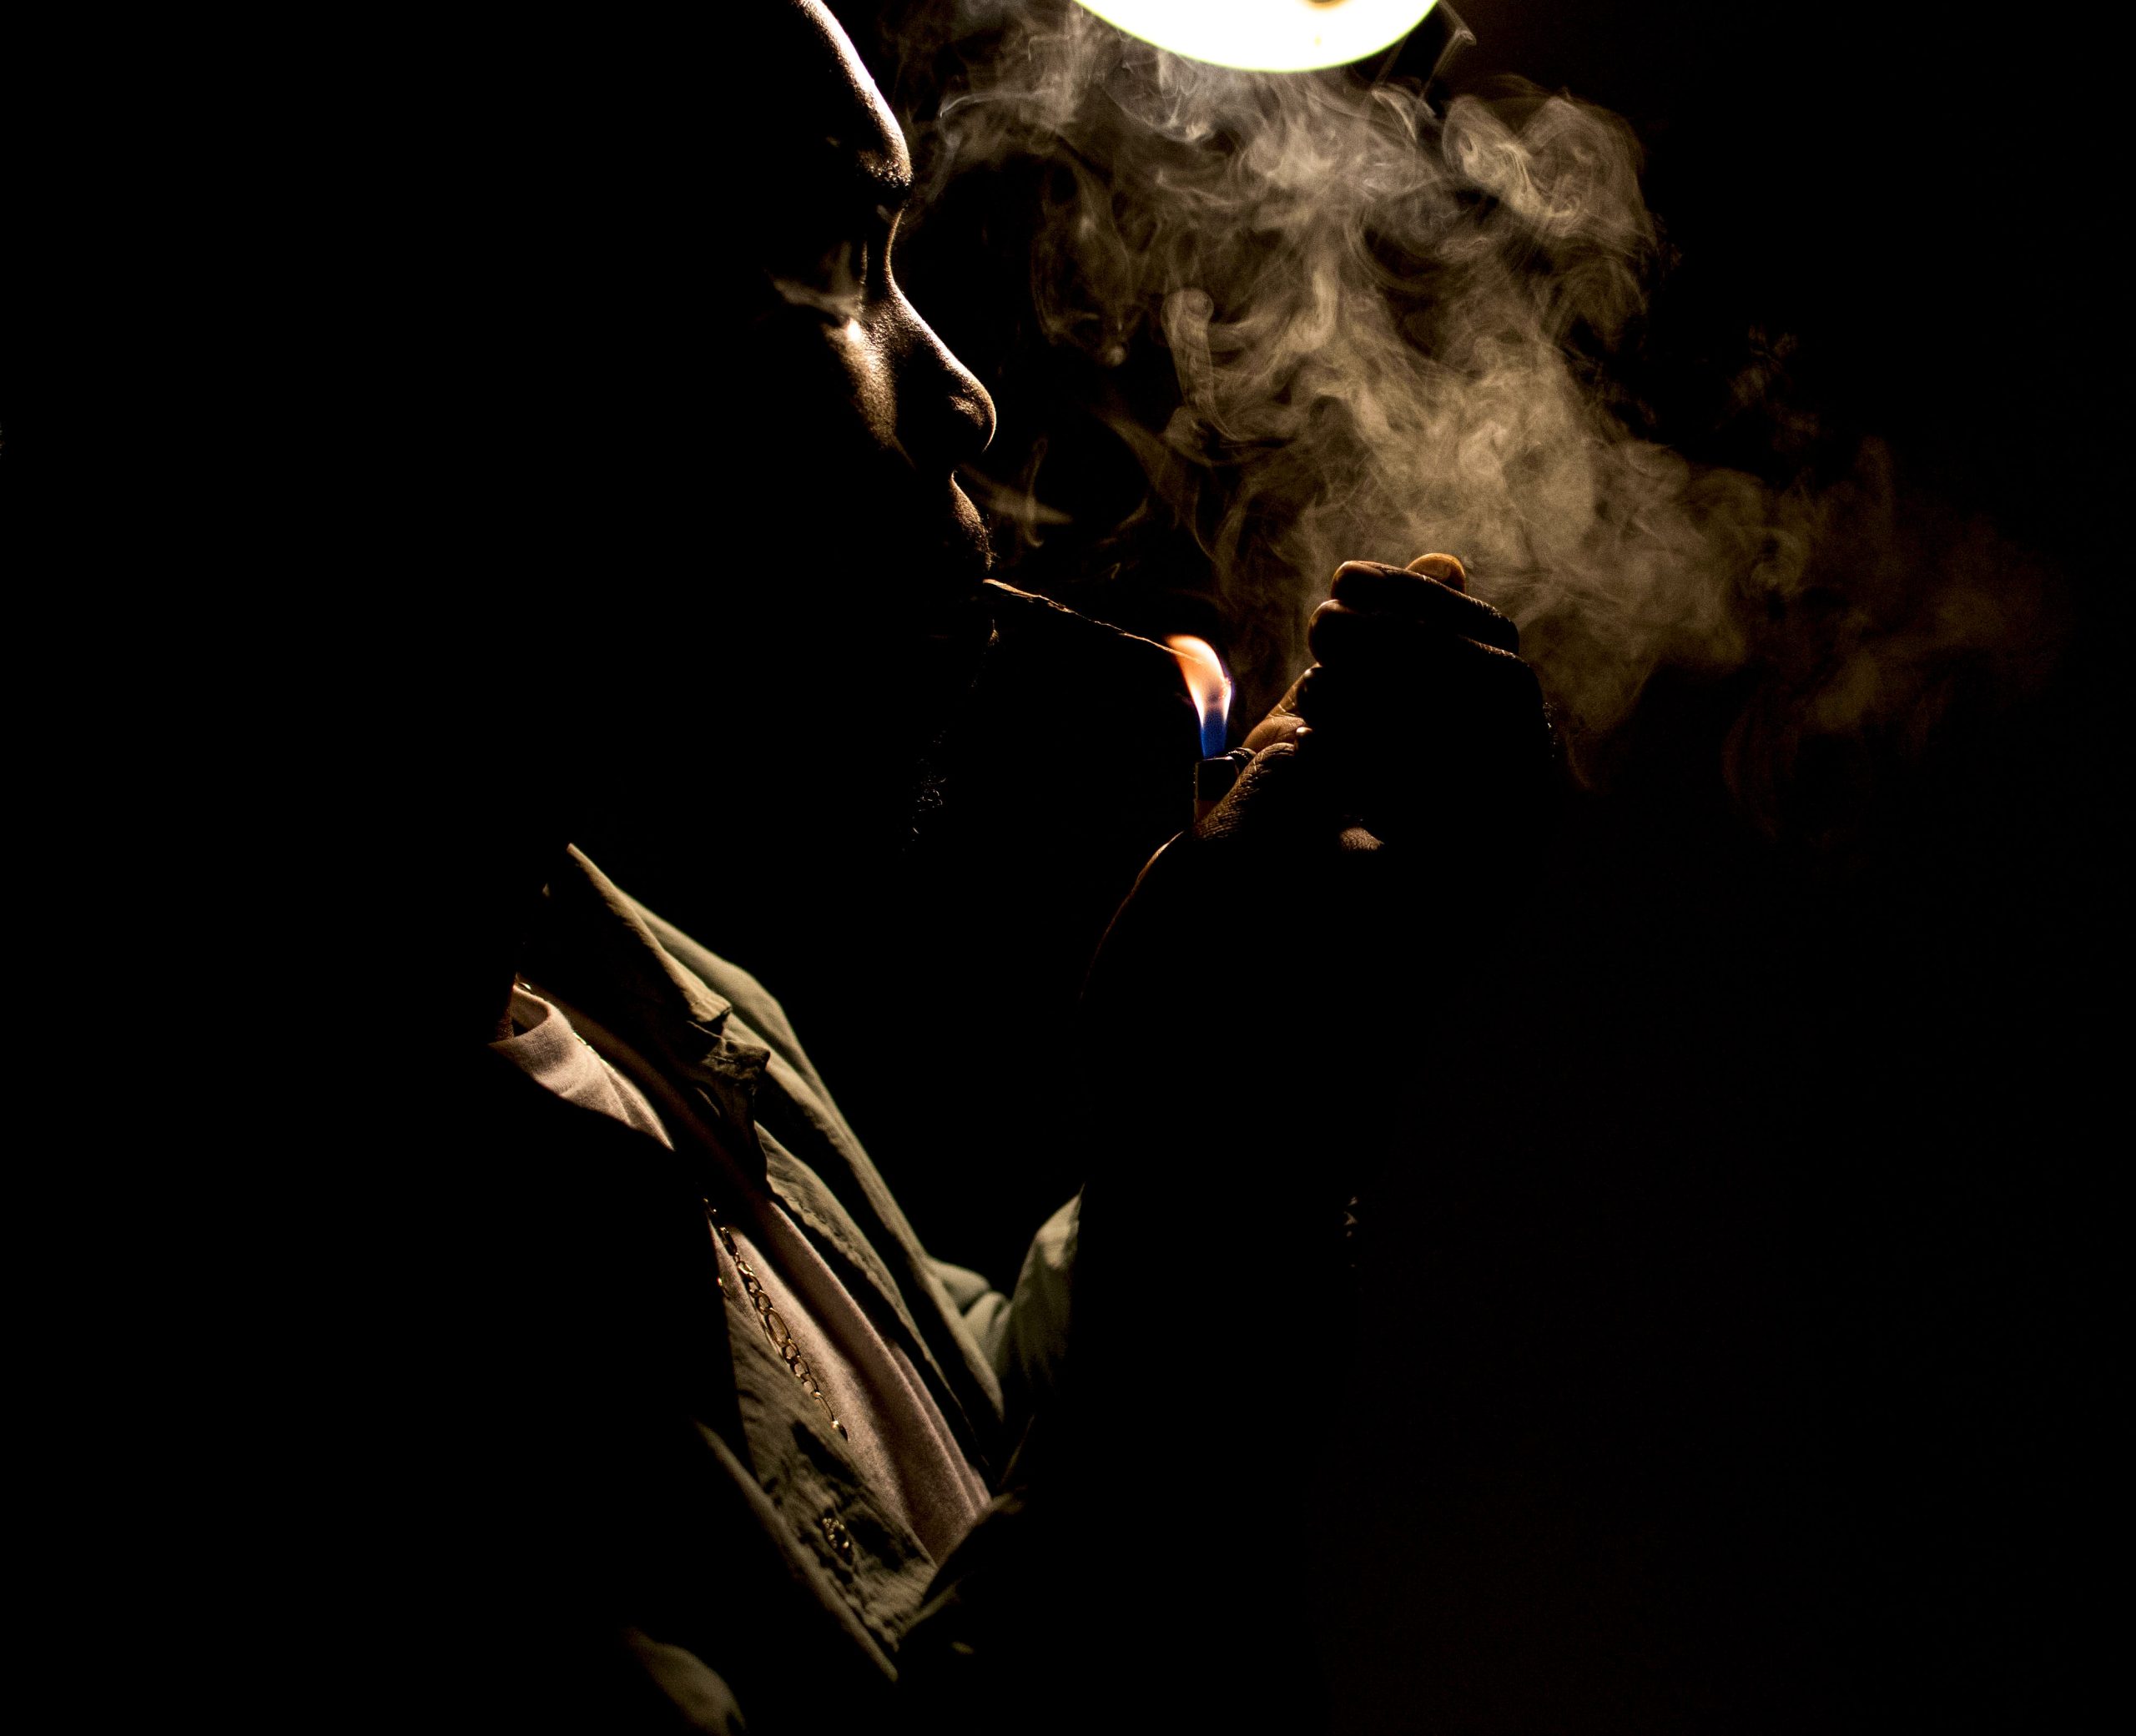 Image: A dark space with a single white lamp over head. In silhouette and smoke, a person cradles a lit match close to the cigarette in their mouth. Photograph by EdVetté Jones.